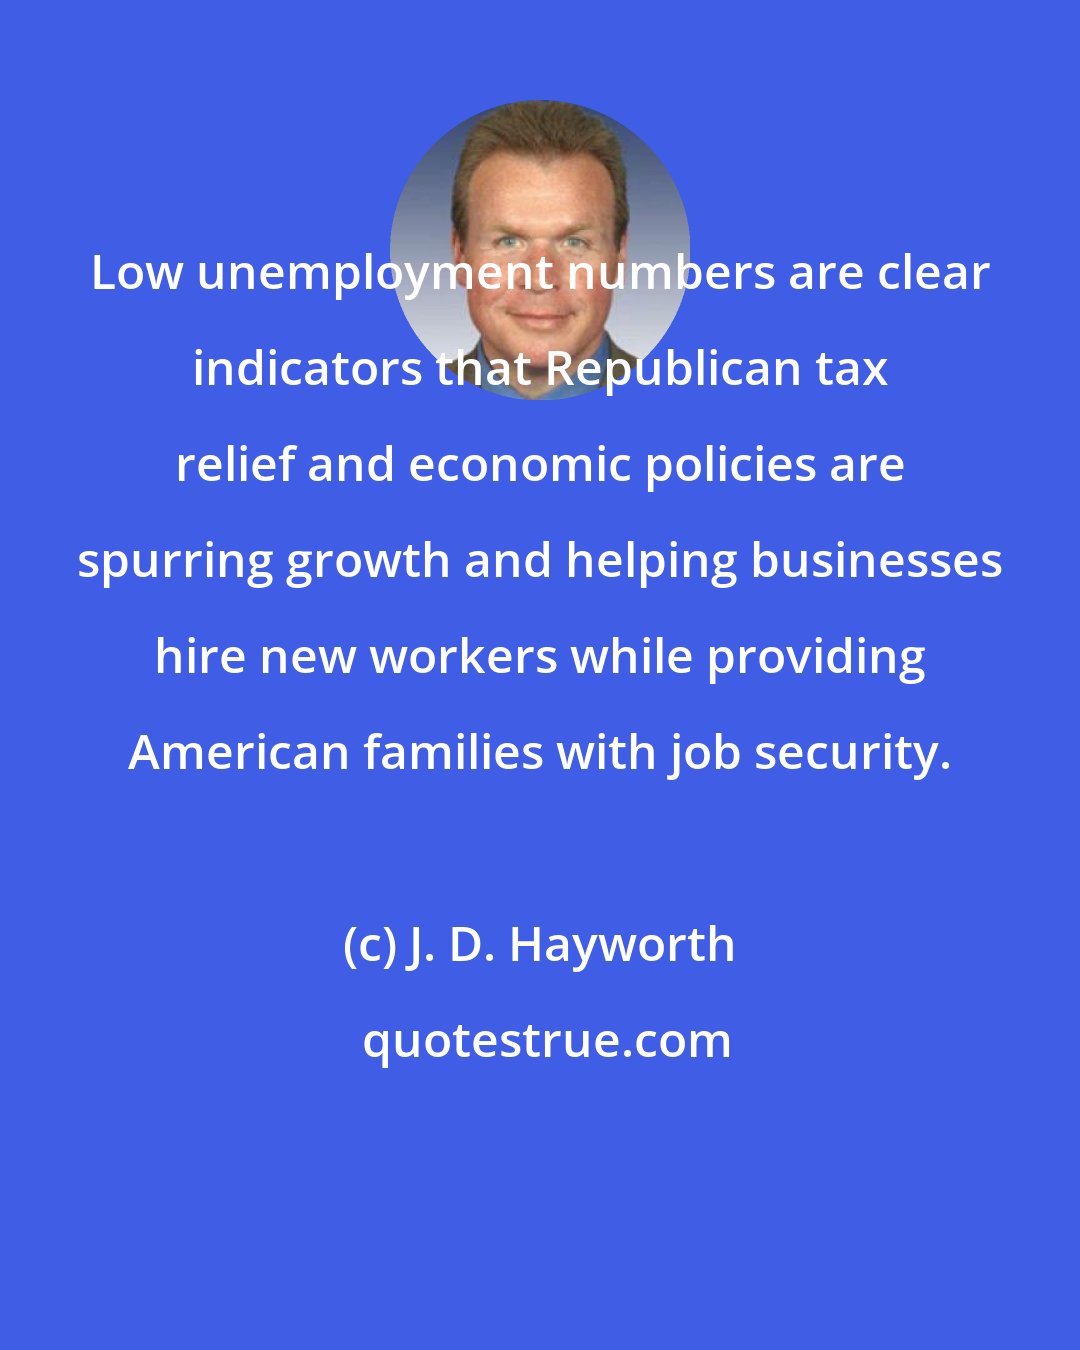 J. D. Hayworth: Low unemployment numbers are clear indicators that Republican tax relief and economic policies are spurring growth and helping businesses hire new workers while providing American families with job security.